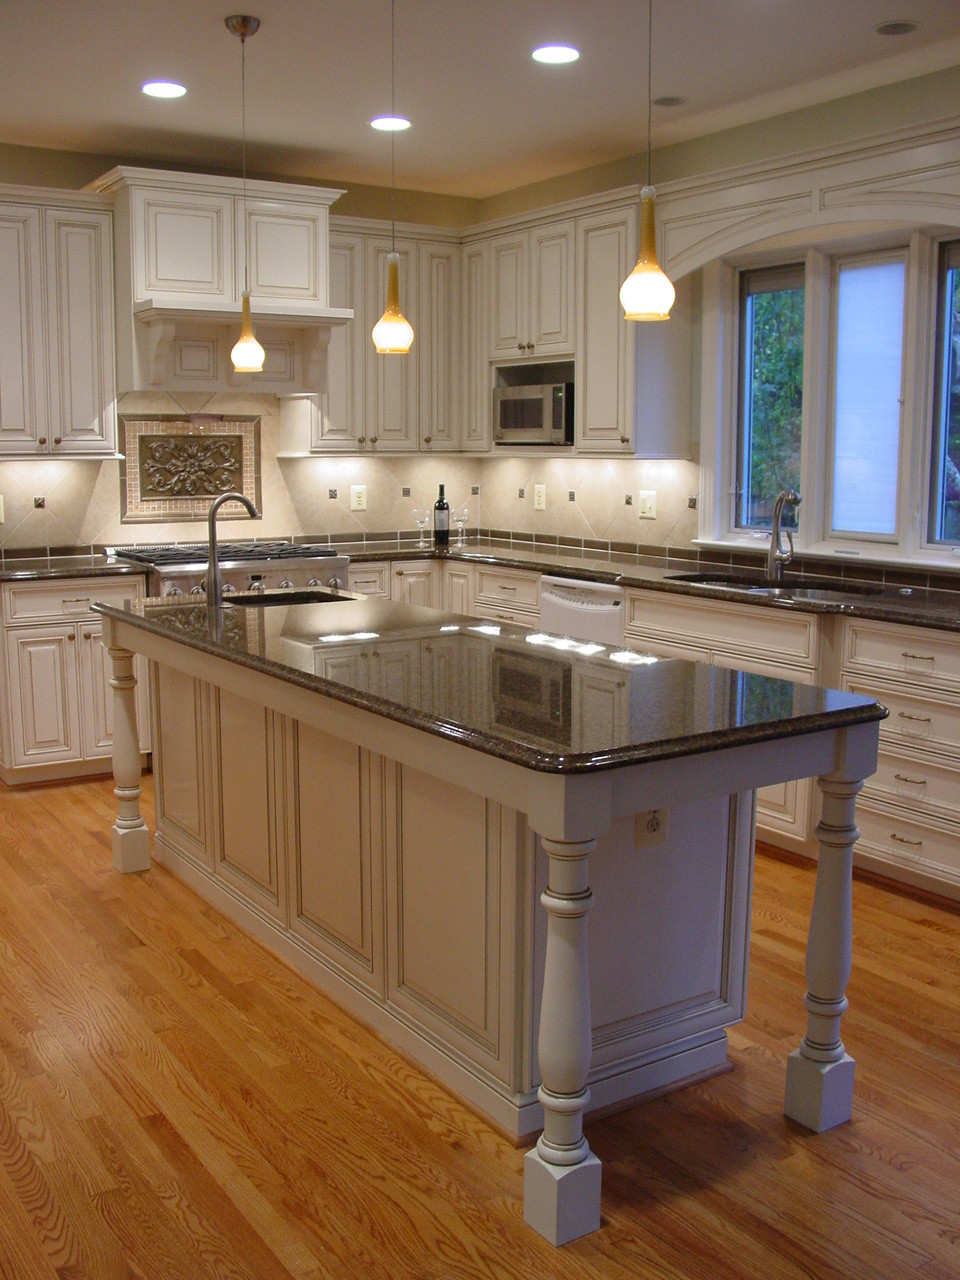 Kitchen Remodel Pictures
 Kitchen Trends for 2015